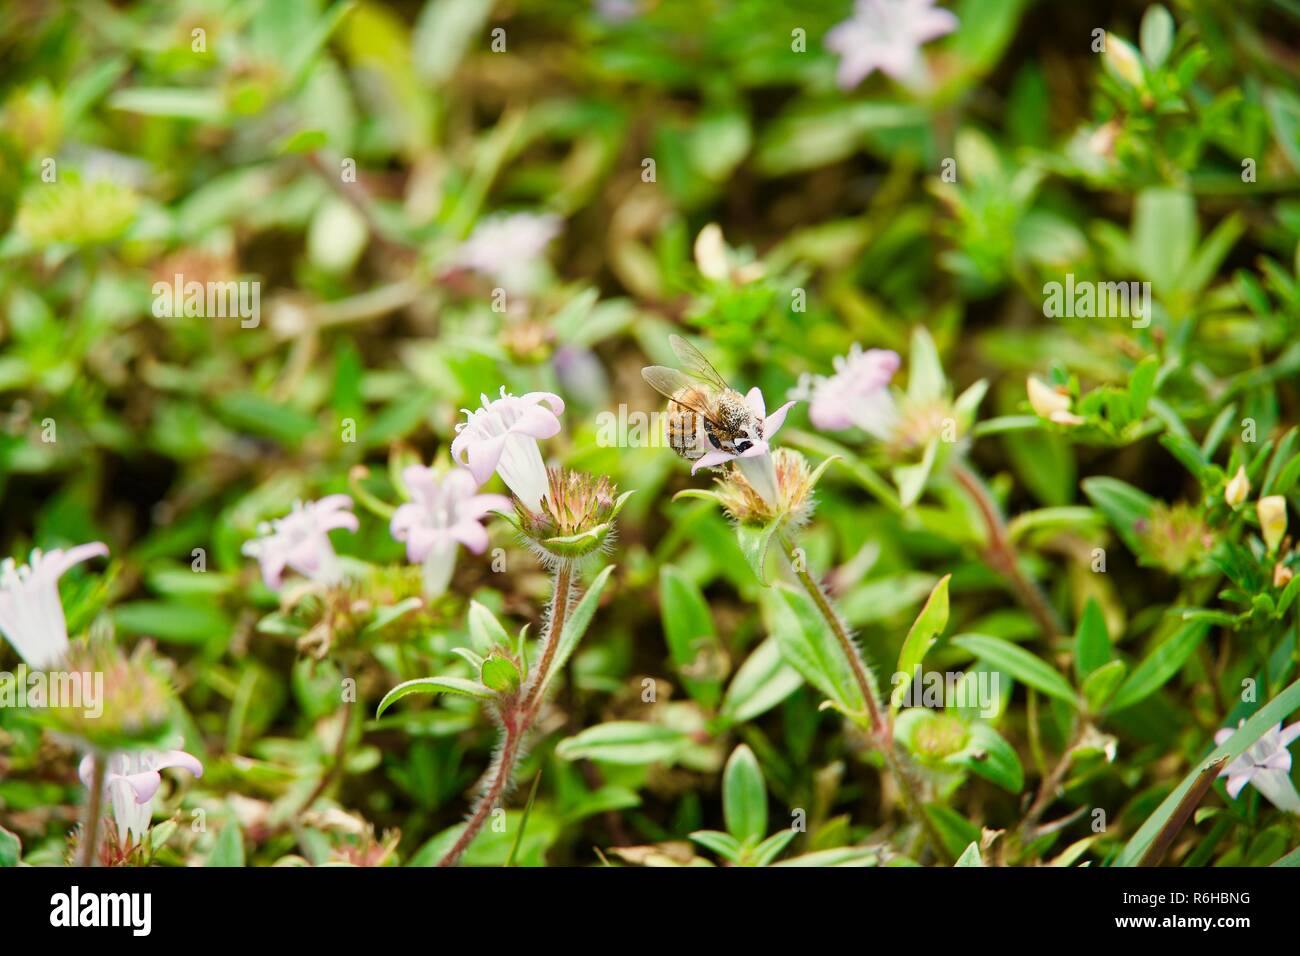 Bee collecting nectar from flowers. Stock Photo